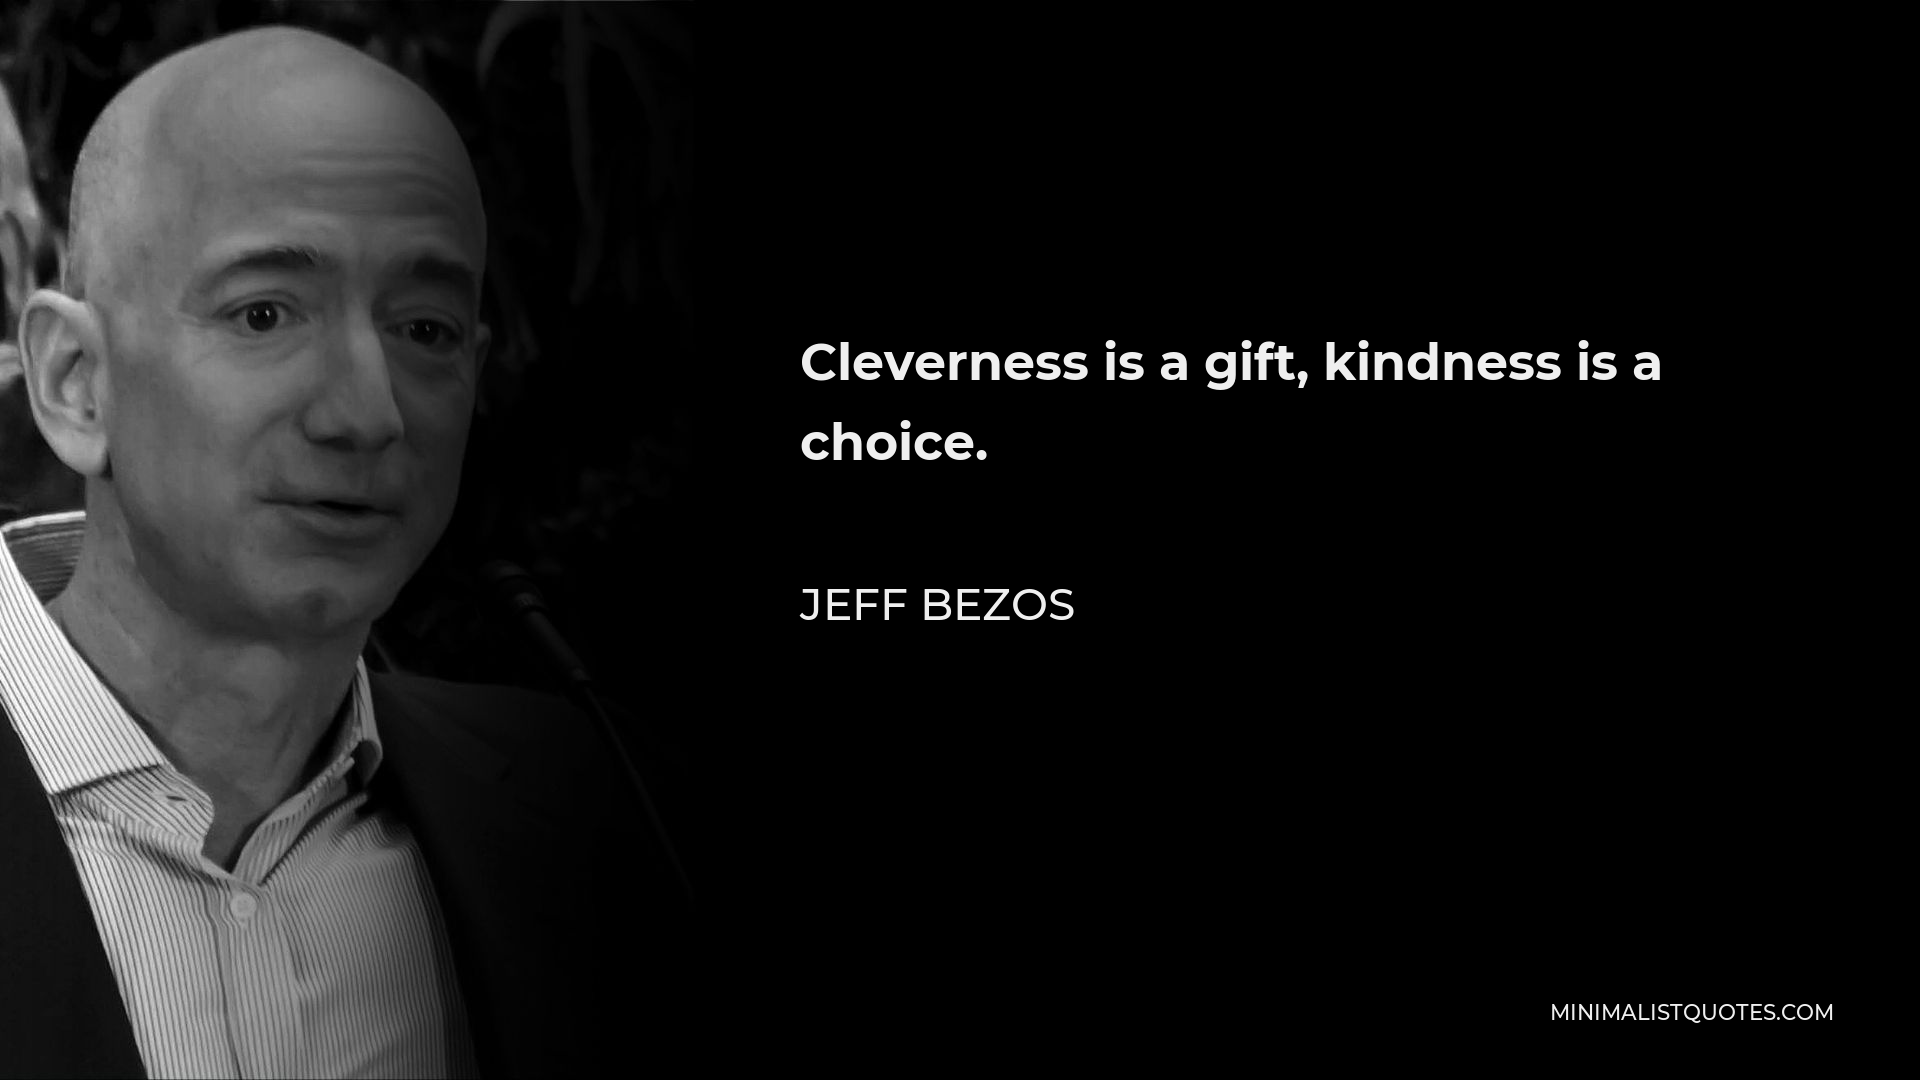 Jeff Bezos Quote - Cleverness is a gift, kindness is a choice.